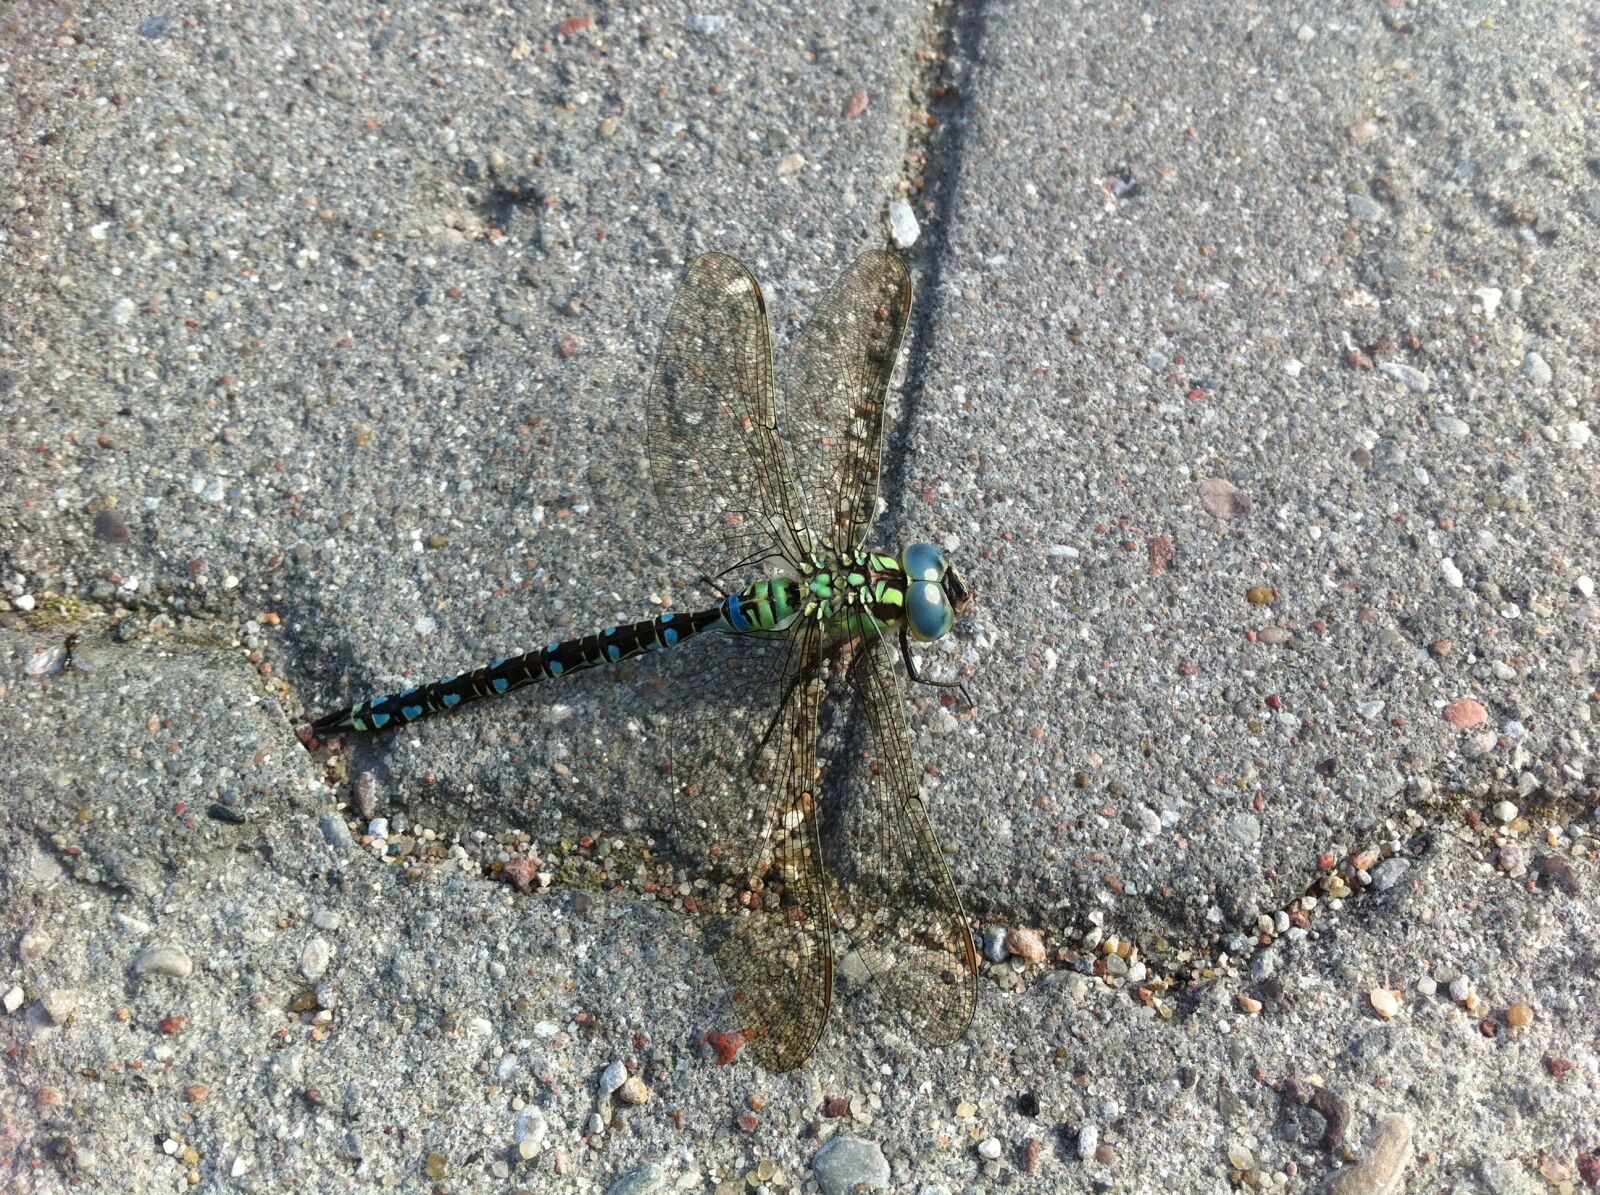 Apple iPhone 4 + iPhone 4 back camera 3.85mm f/2.8 sample photo. Dragonfly, insect, micro photography